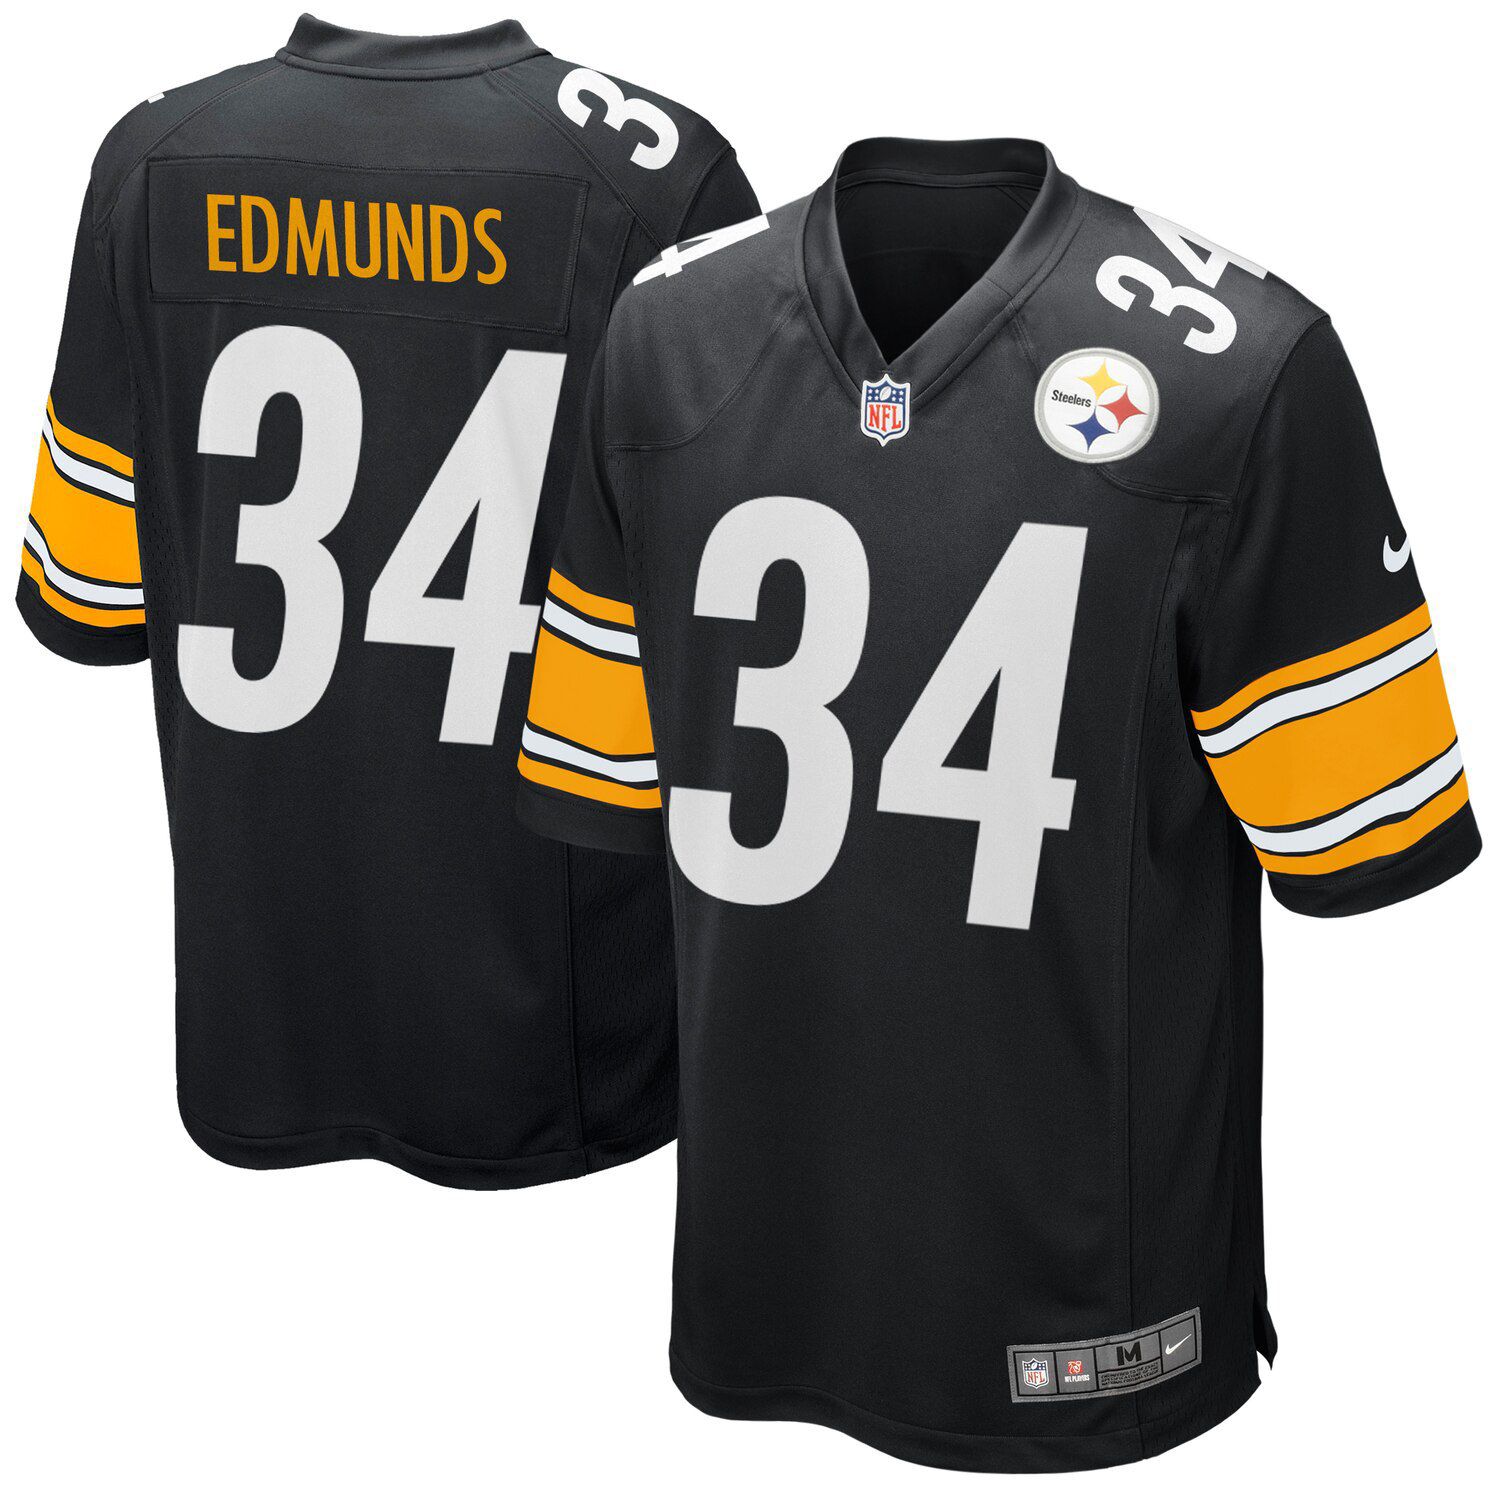 Black Pittsburgh Steelers Game Jersey